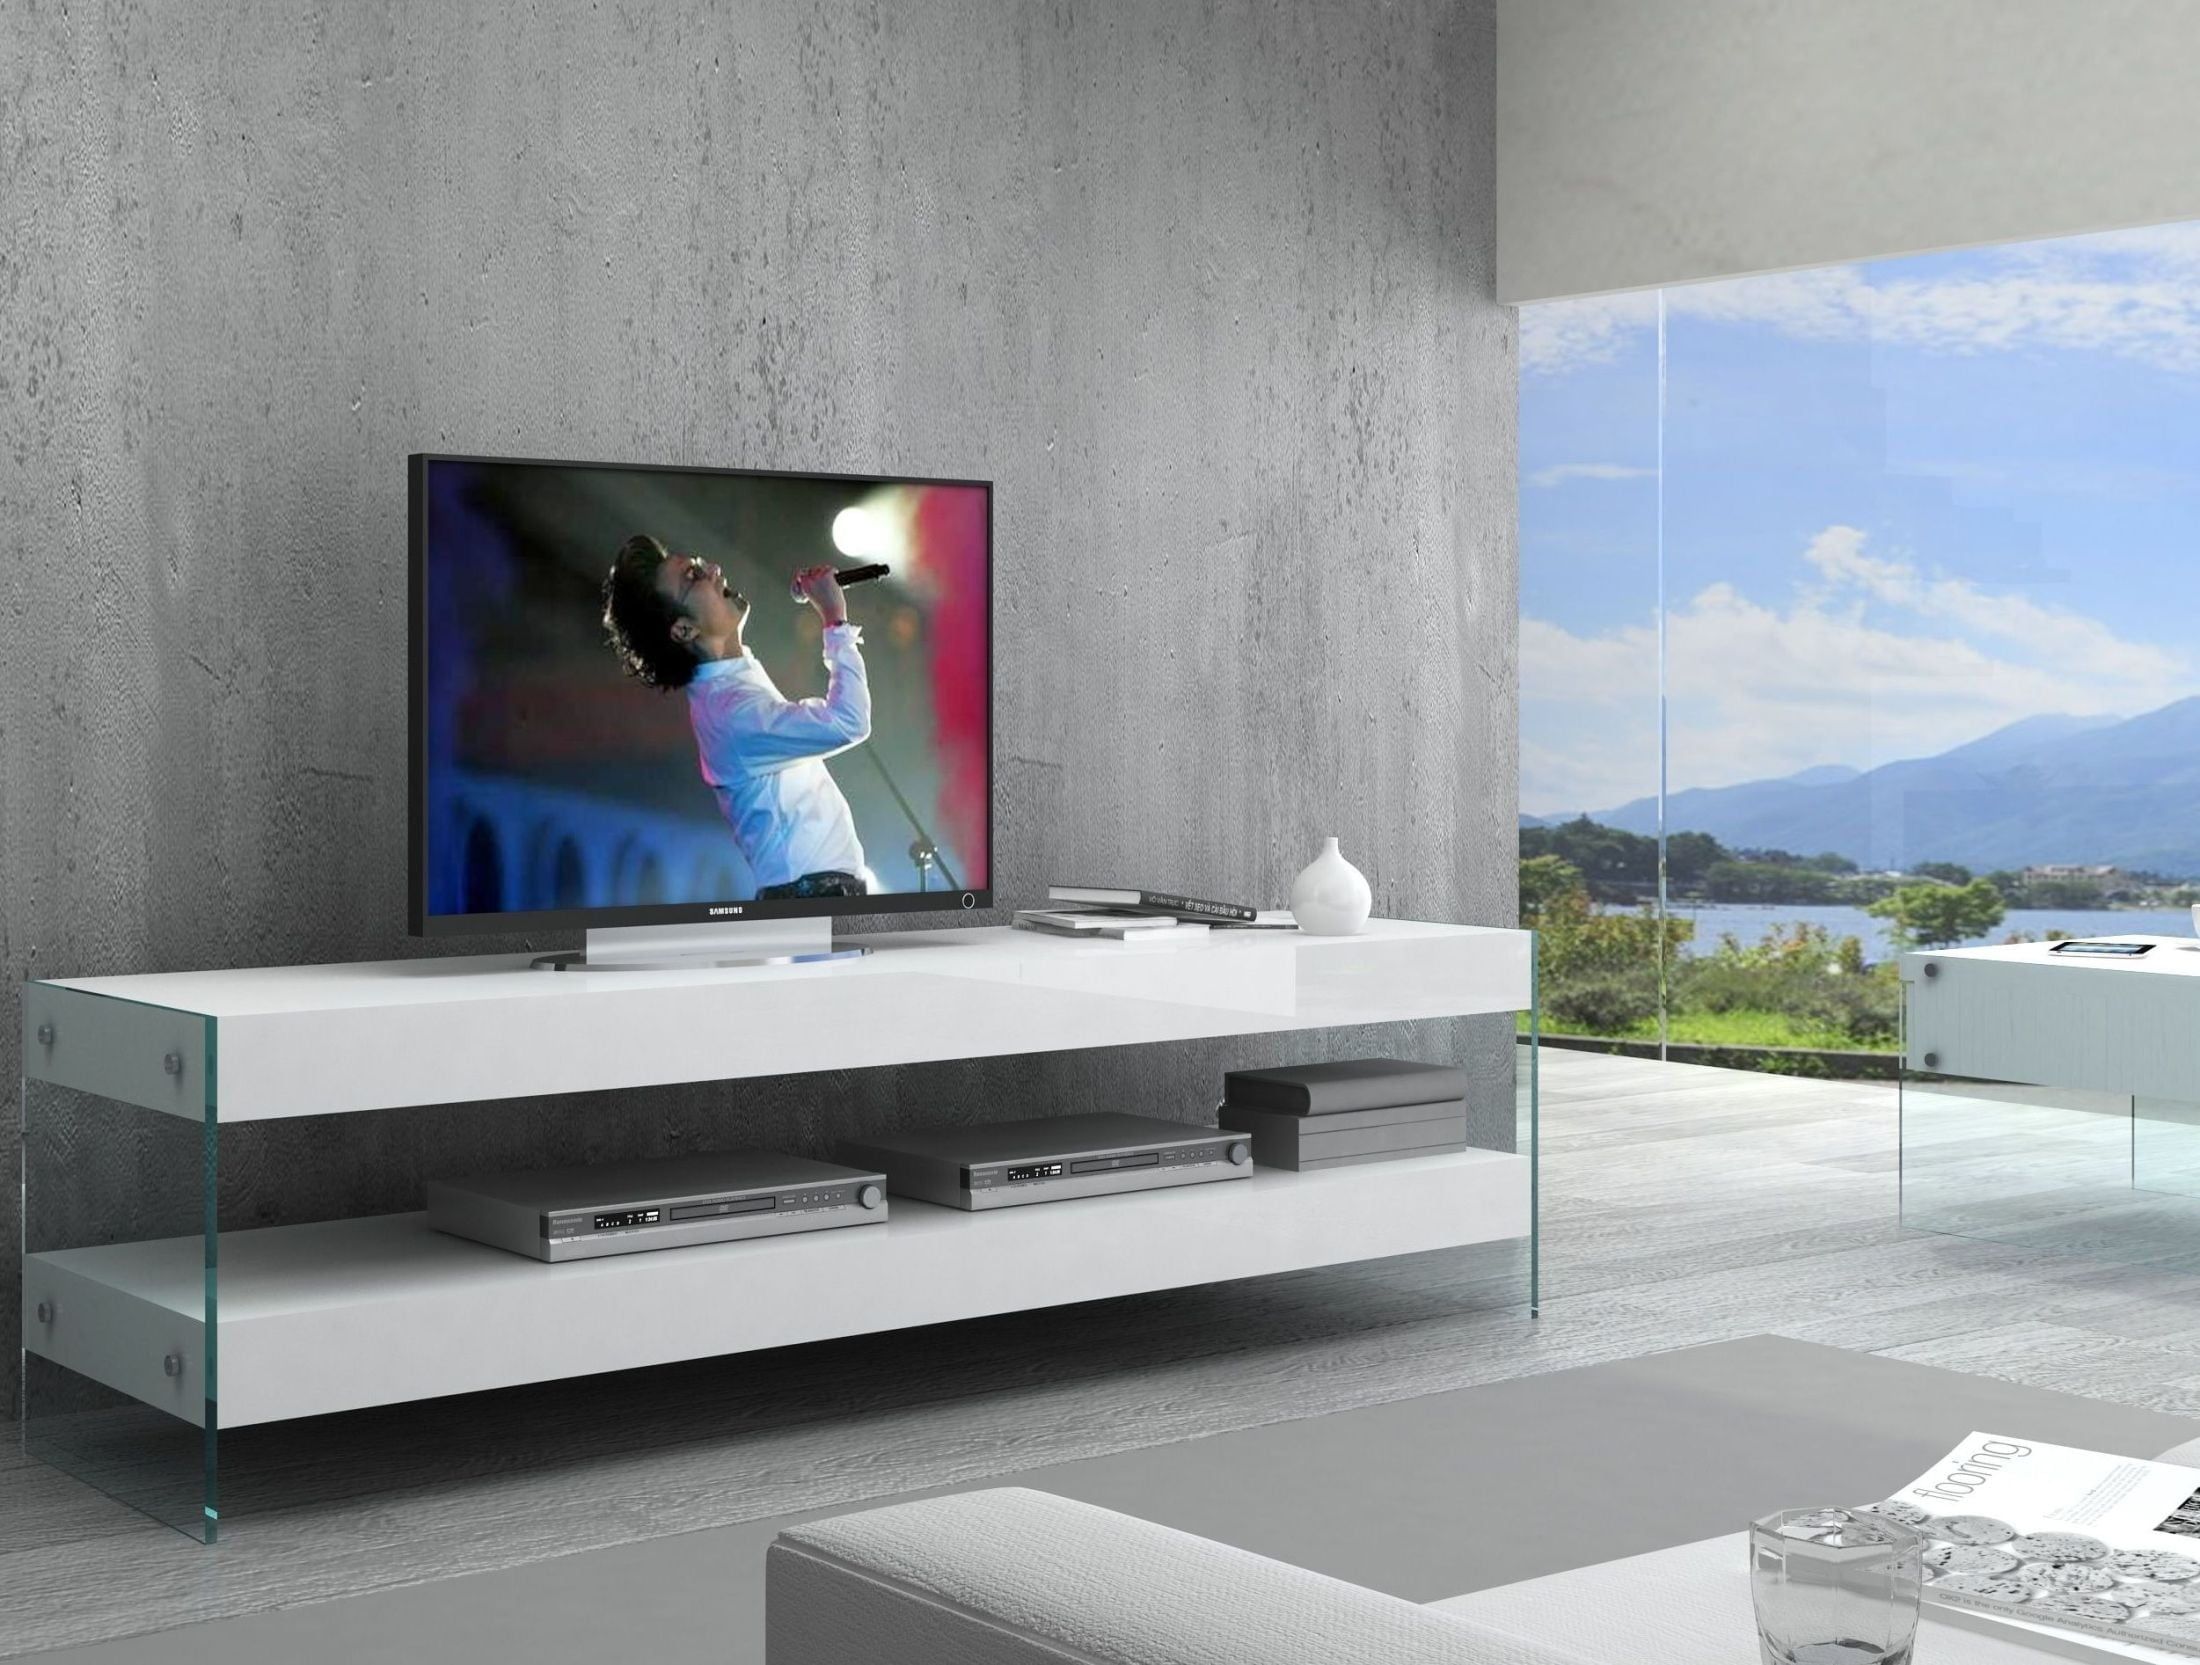 Cloud White High Gloss Tv Stand From Jnm | Coleman Furniture For High Gloss White Tv Cabinets (View 2 of 15)